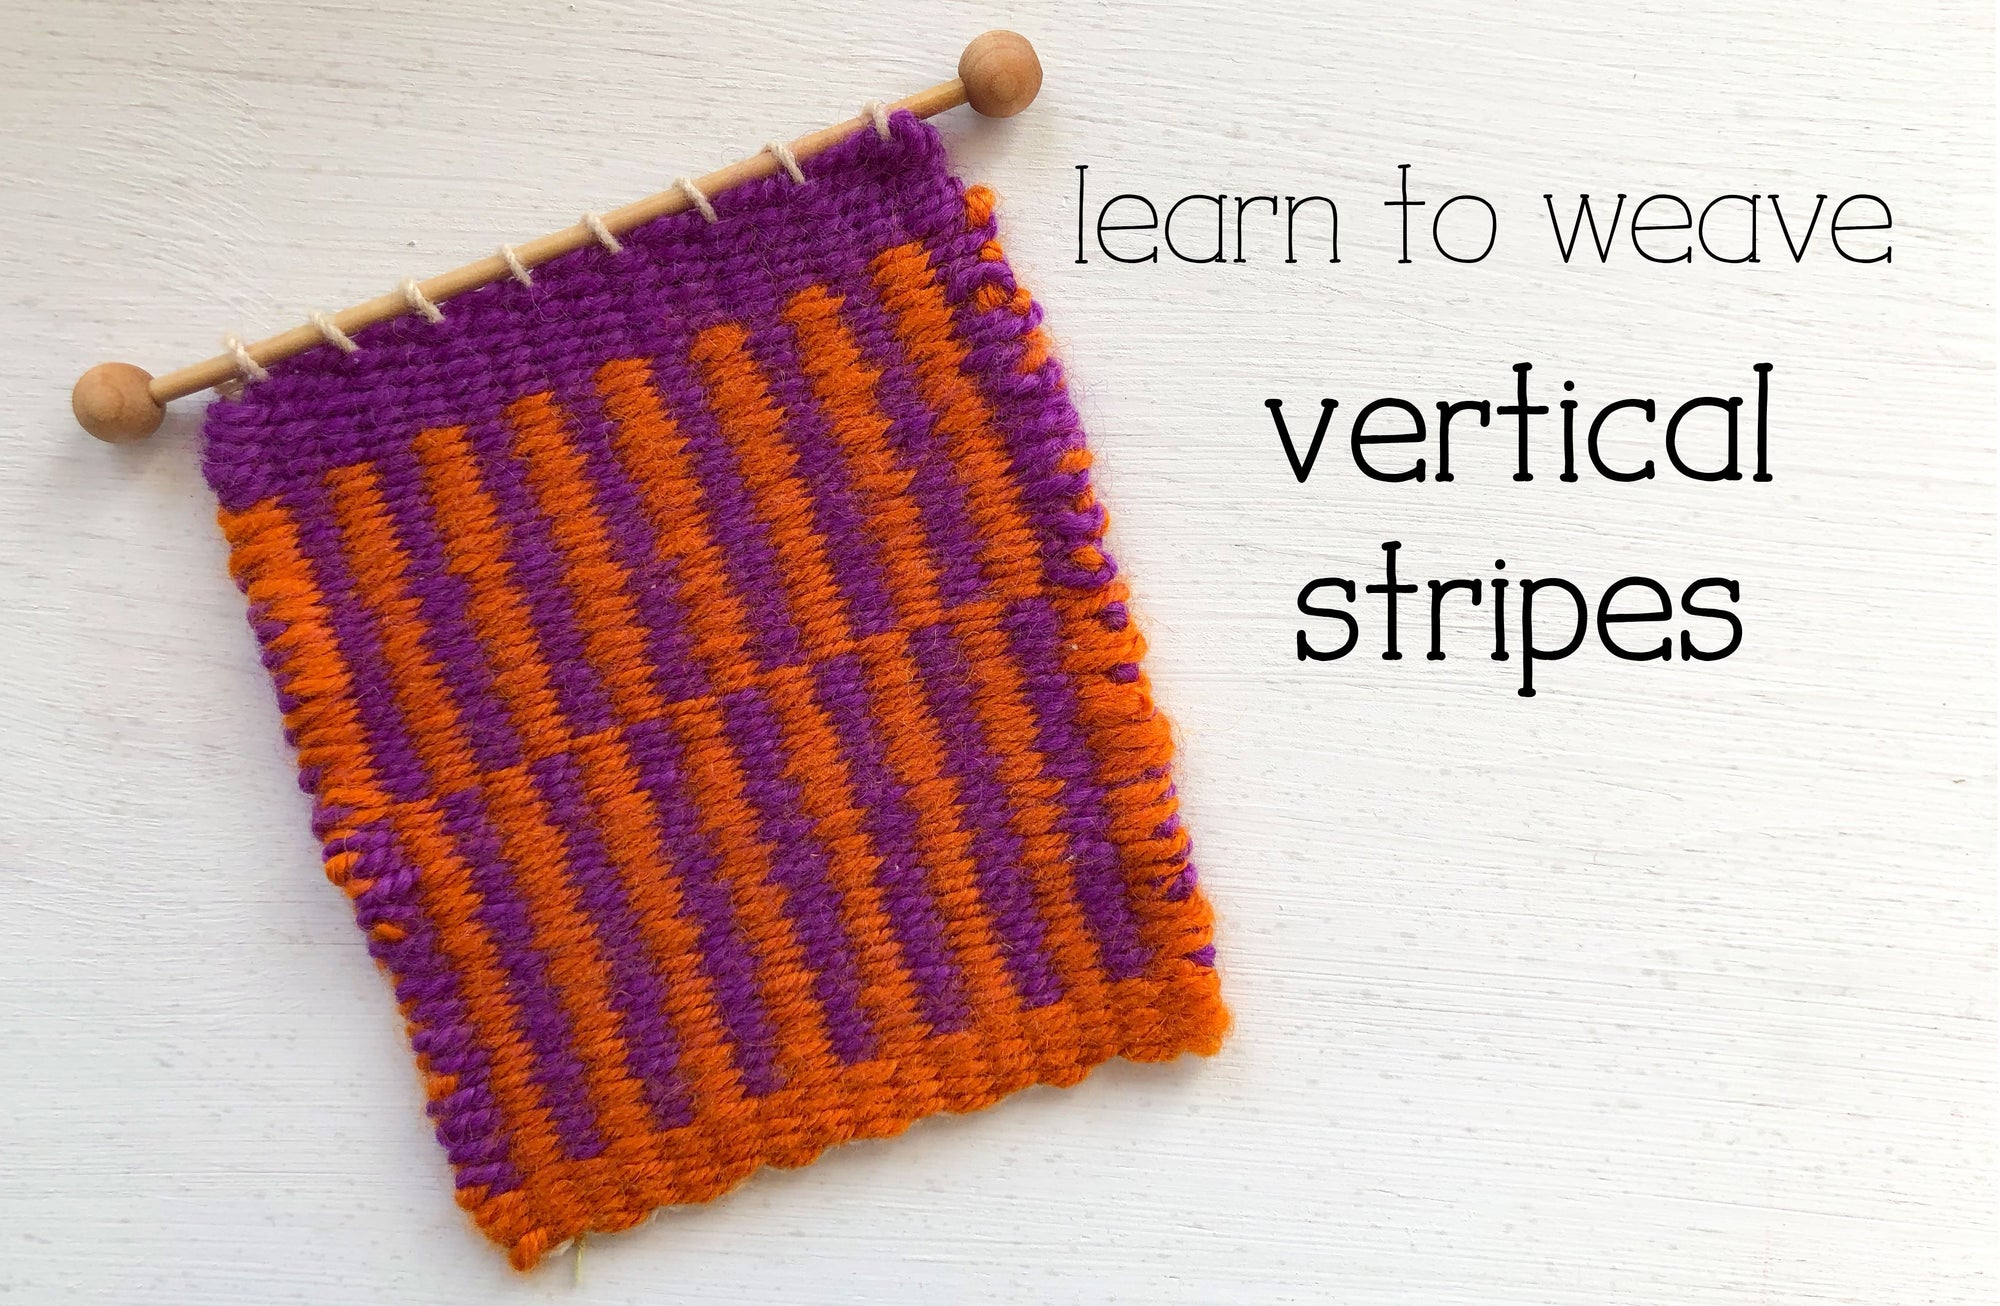 How to Weave on a Tiny Loom 